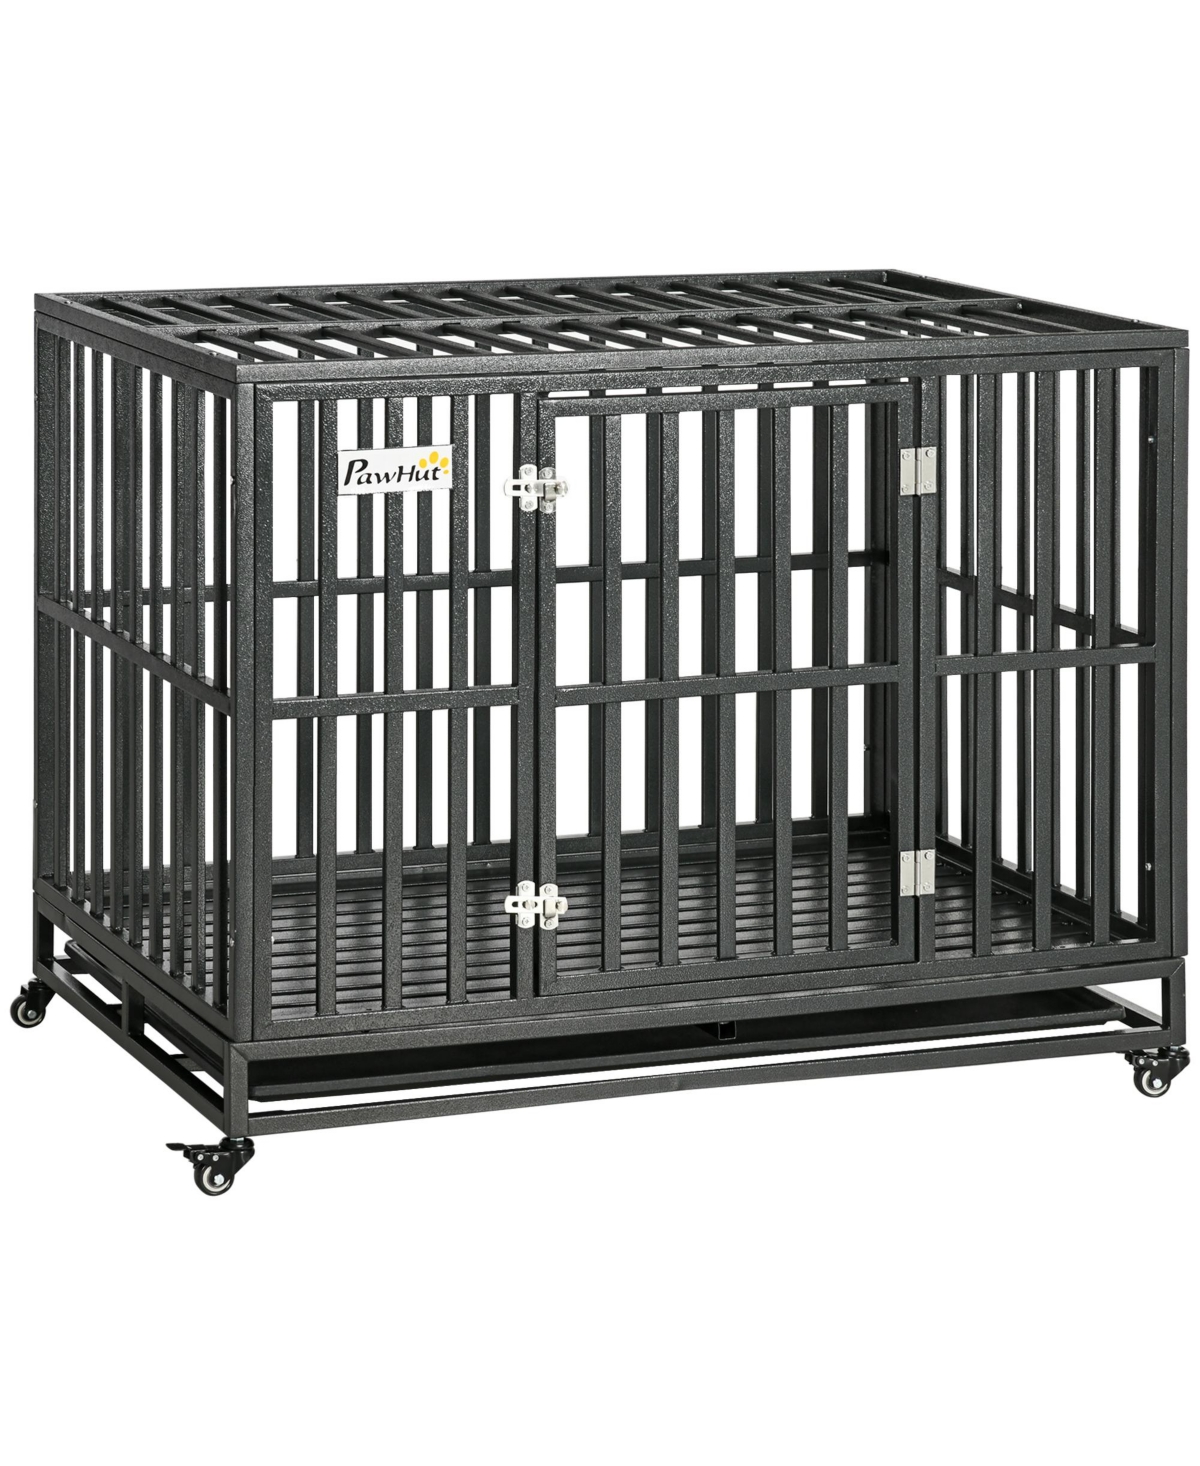 Heavy Duty Dog Crate Metal Kennel and Cage Dog Playpen with Lockable Wheels, Slide-out Tray and Anti-Pinching Floor - Black